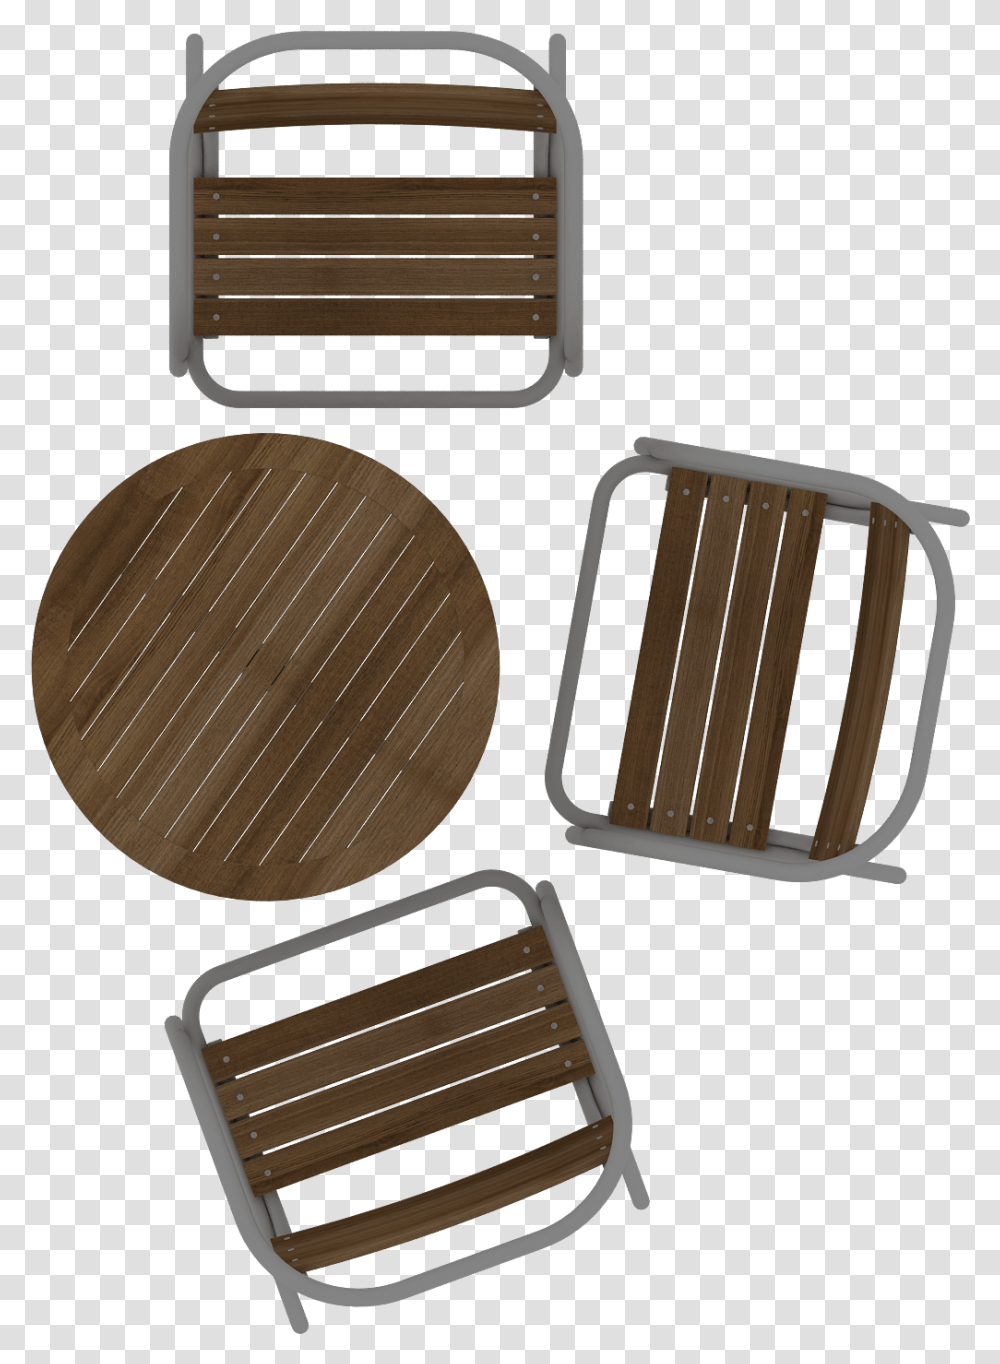 Table And Chairs Table And Chairs Top View, Buckle, Wood, Pedal, Diamond Transparent Png